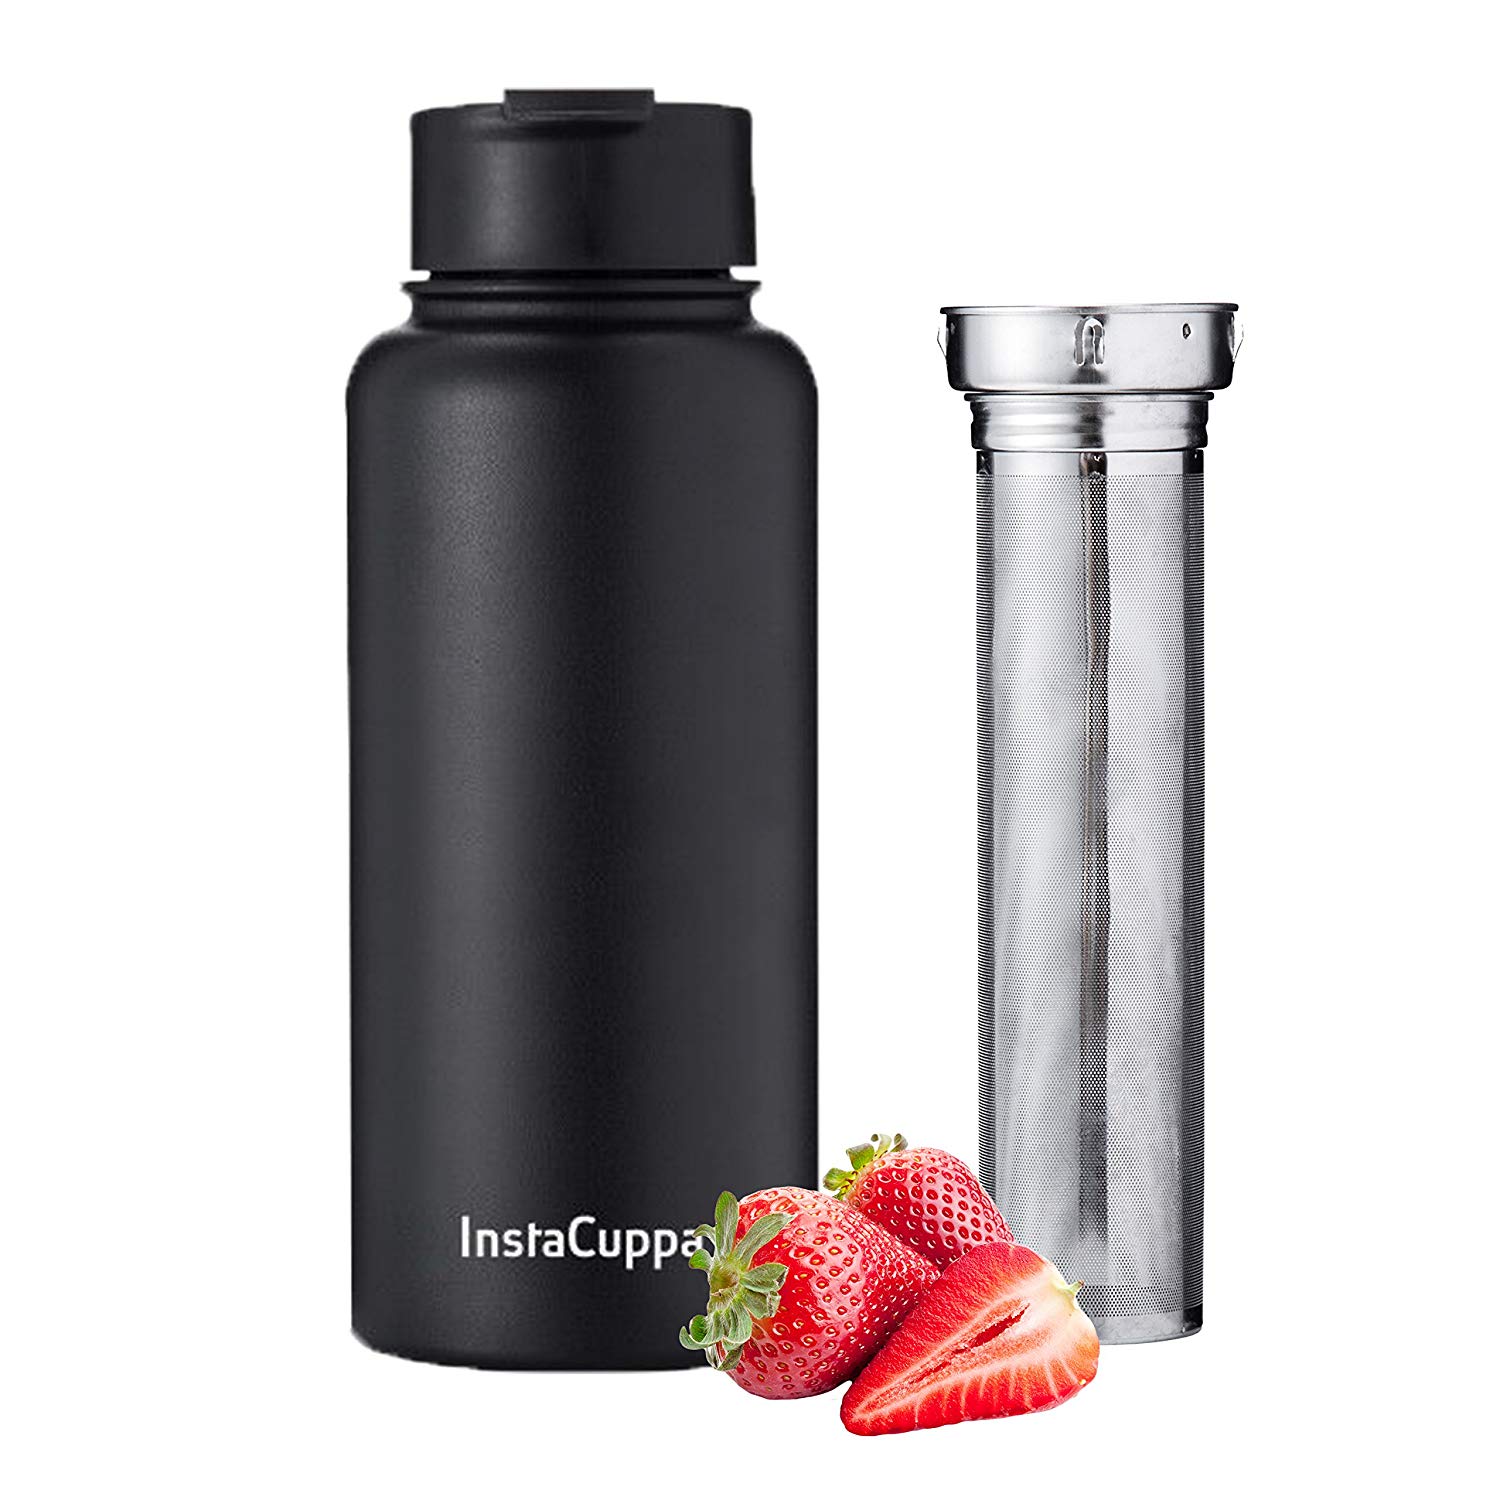 InstaCuppa Thermos Fruit Infuser Water Bottle 1 Litre, Stainless Steel Stainless Steel Fruit Infuser Water Bottle